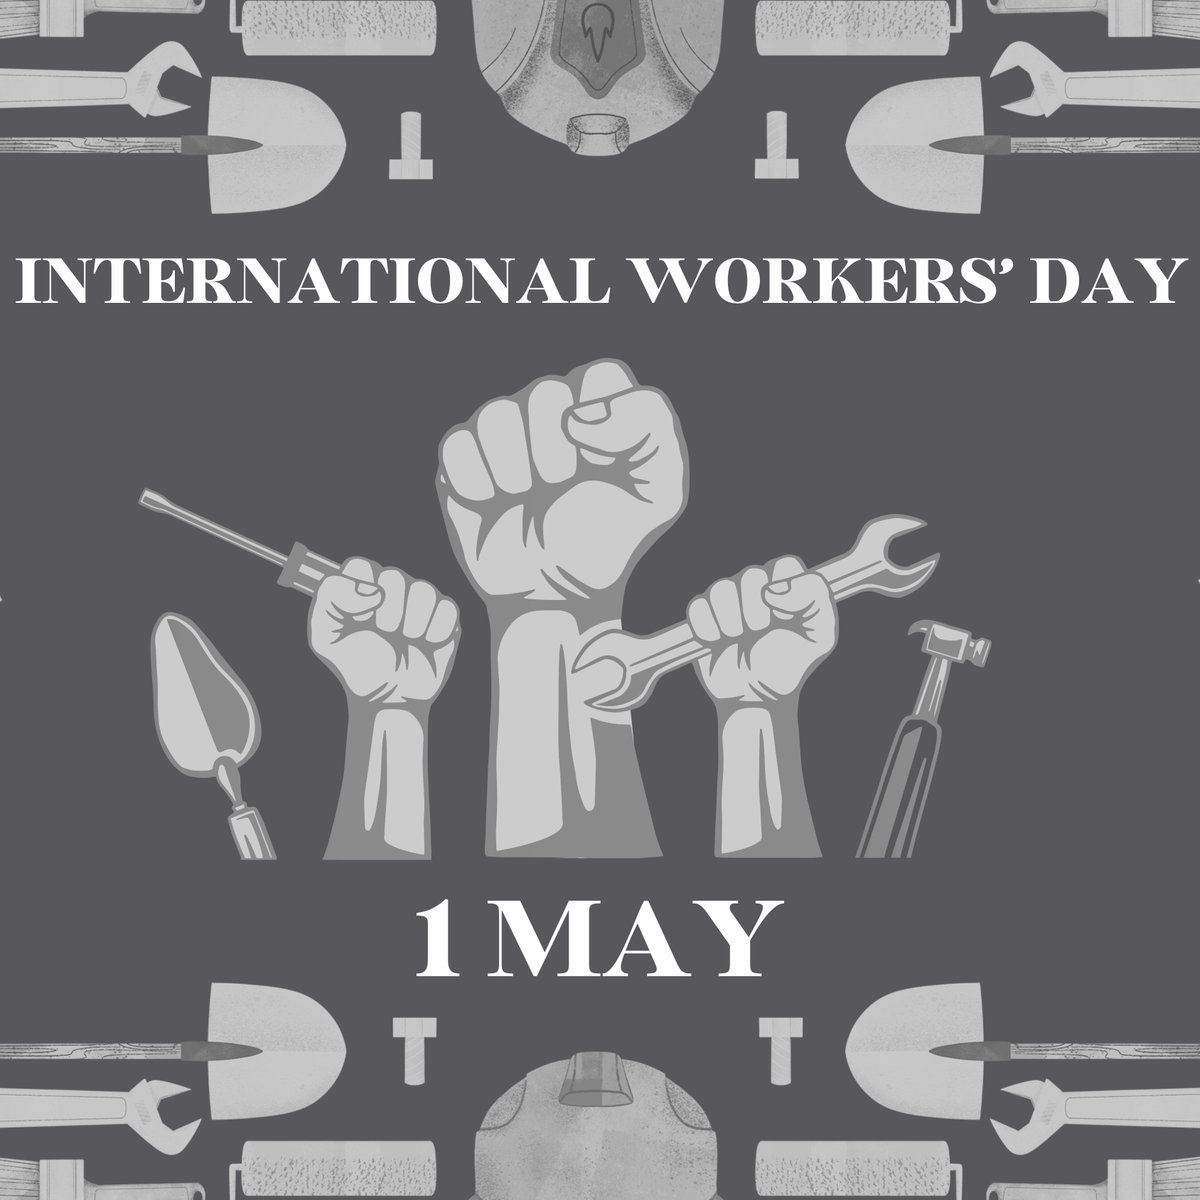 May we take a moment to acknowledge and celebrate the labour movement's invaluable contribution.

#InternationalWorkersDay #mayday #LabourMovement #tradeunions